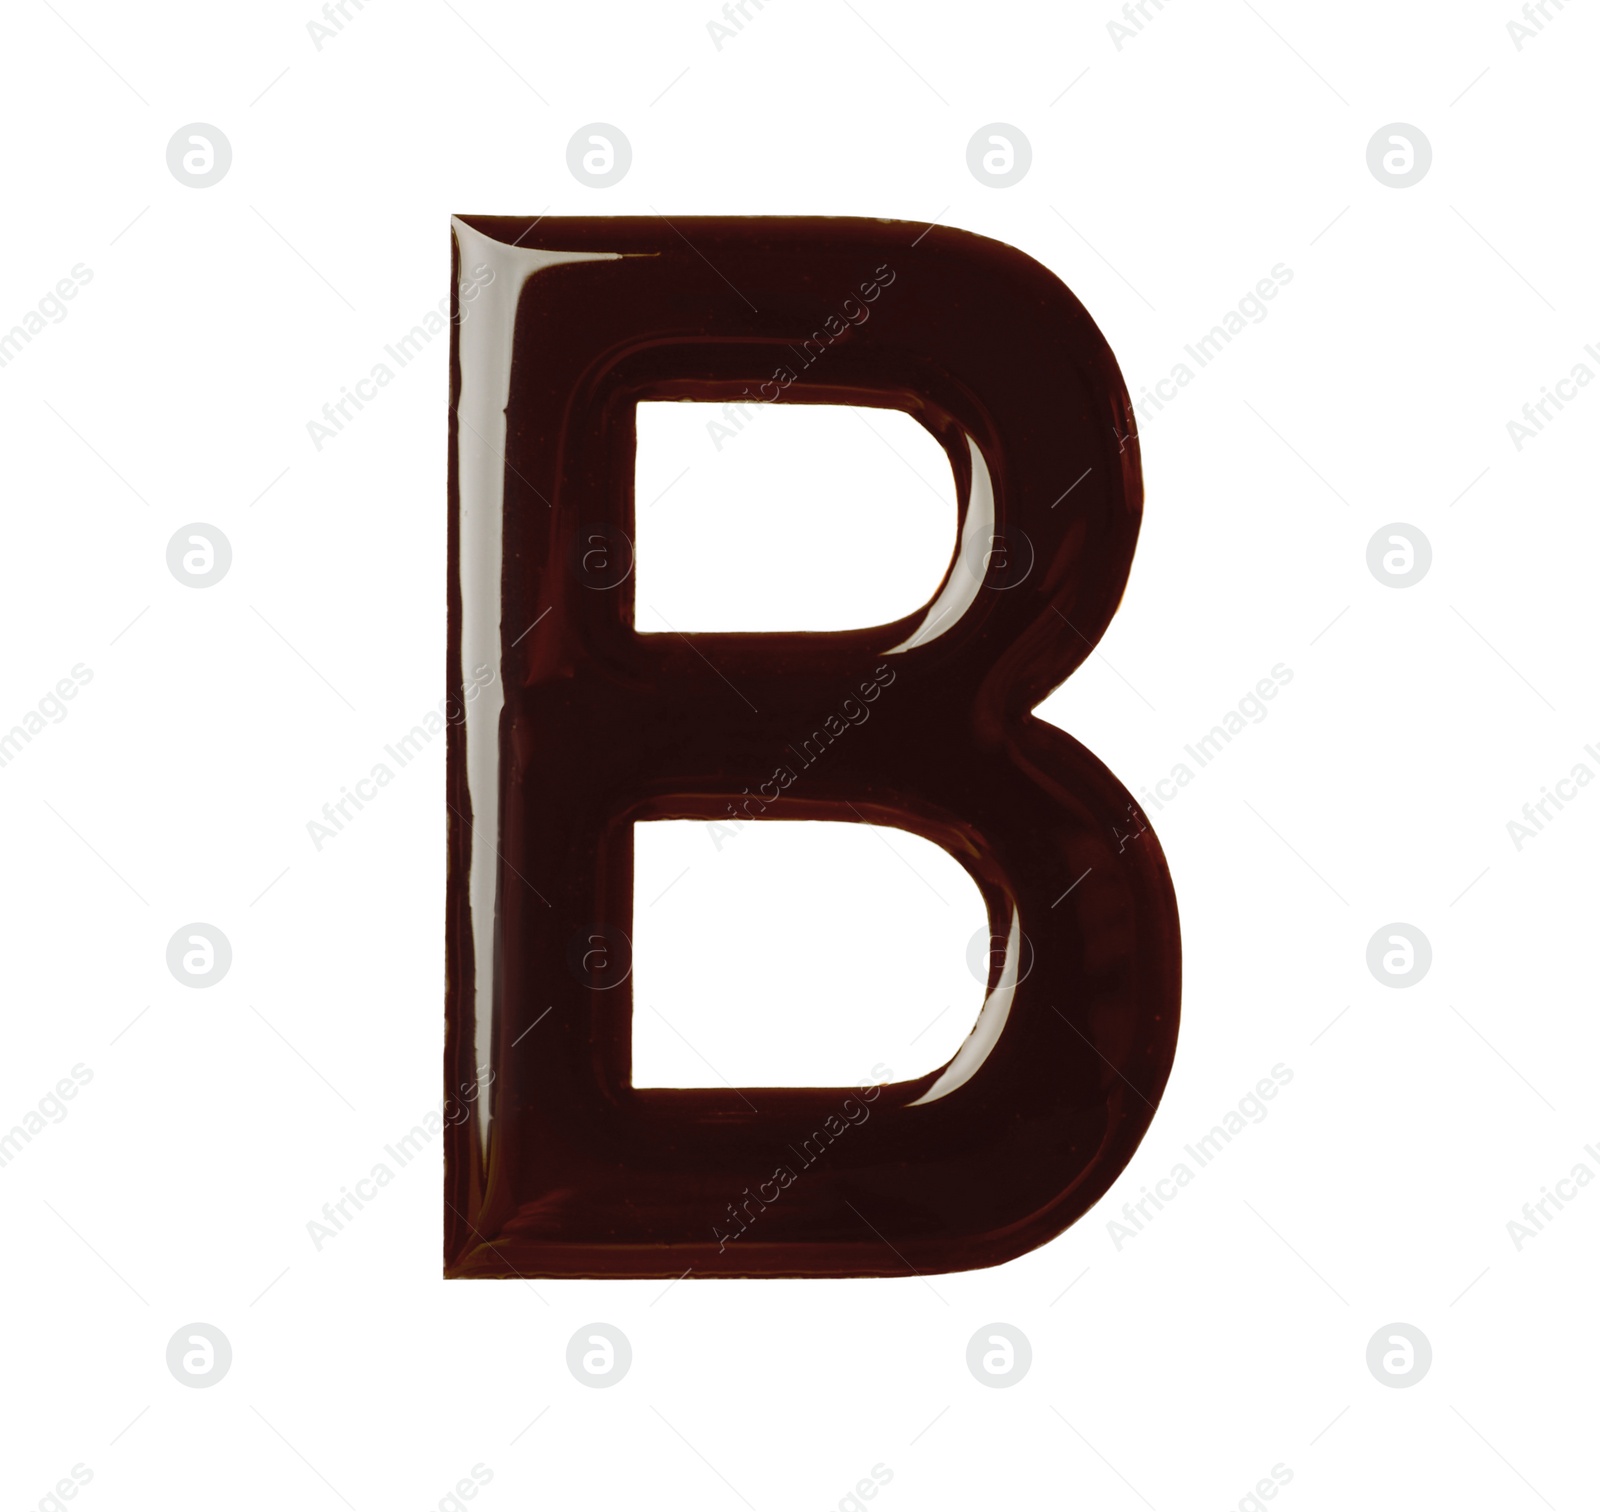 Photo of Letter B made of chocolate on white background